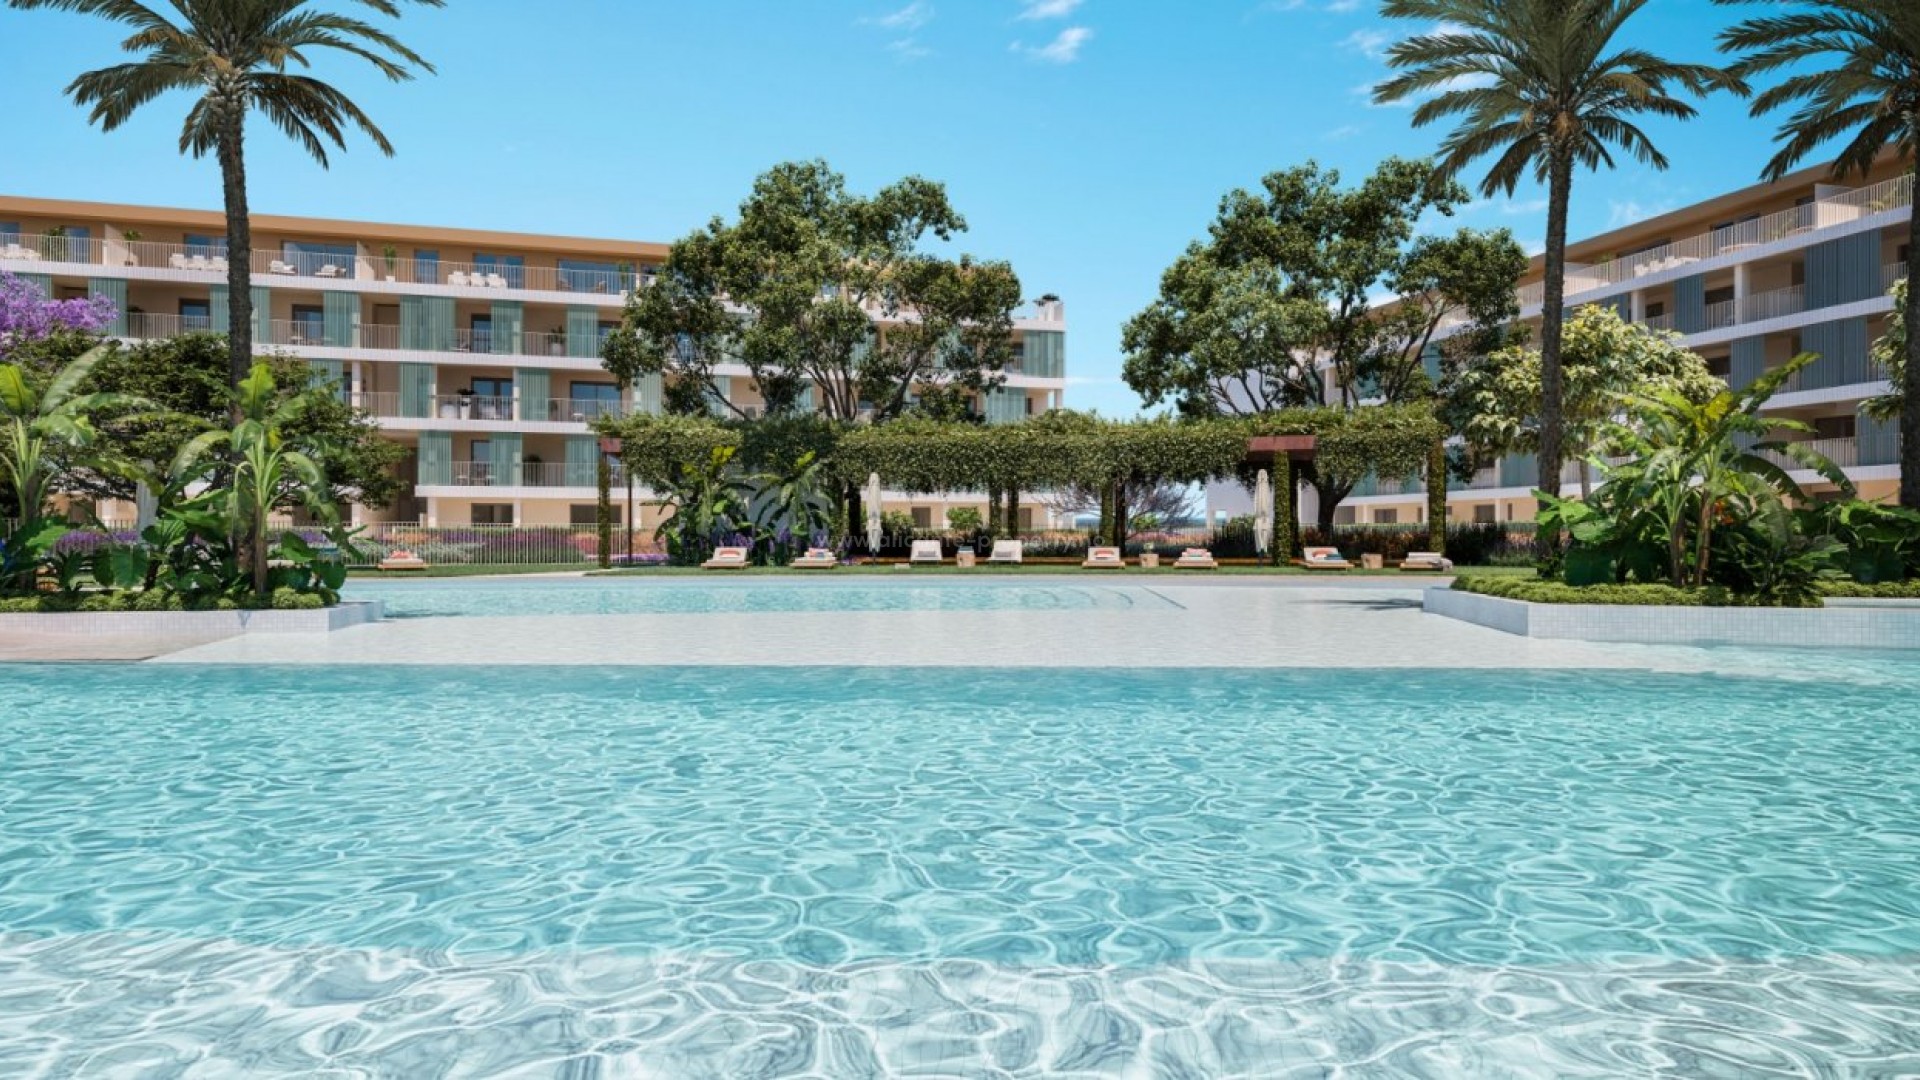 Exclusive residential complex in Denia with apartments and penthouses, 2/3/4 bedrooms, swimming pool for adults and children, gym, a step from the sea